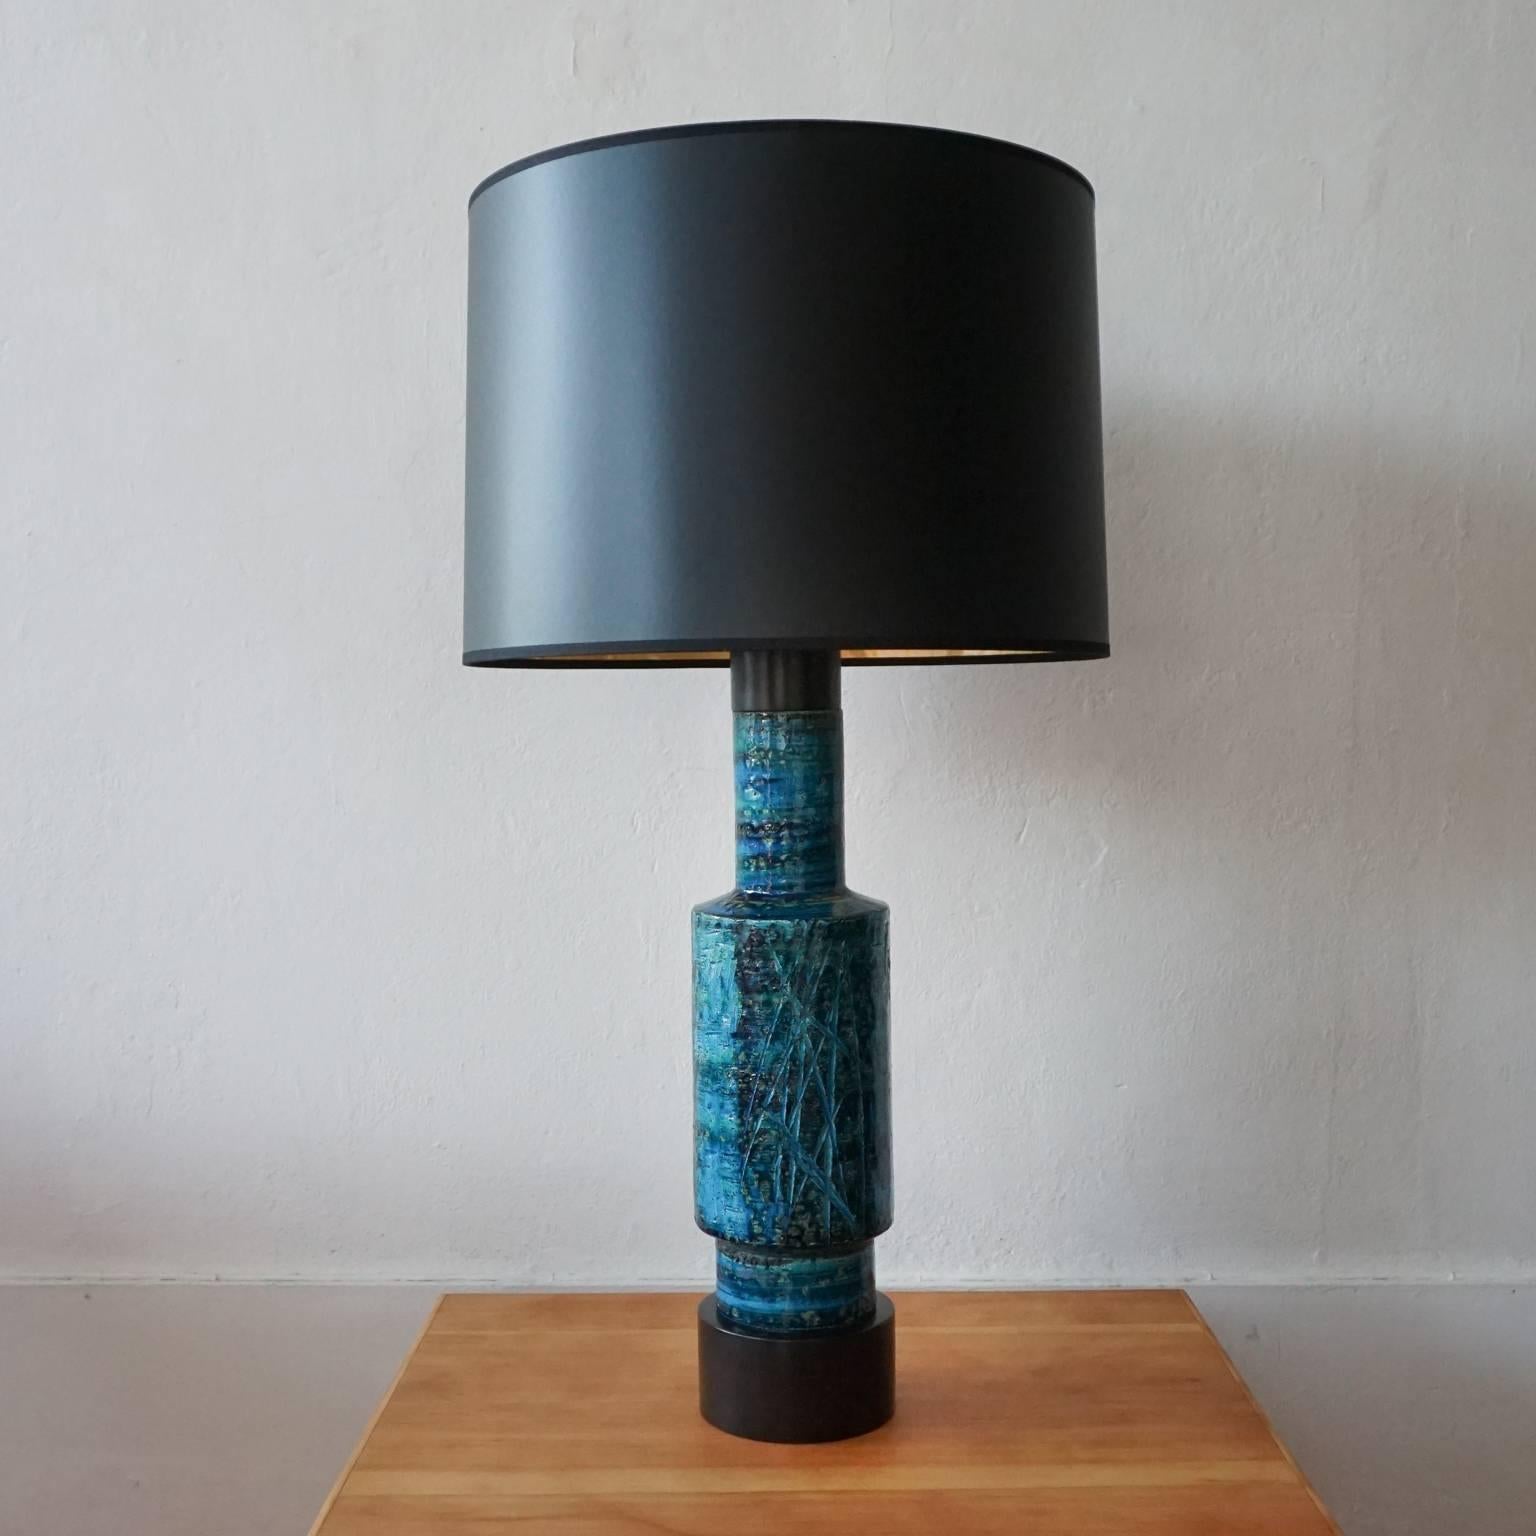 Ceramic lamp by Aldo Londi for Bitossi, with a repeating sgraffito design and Rimini blue glaze. 

Measures: New parchment shade: 16